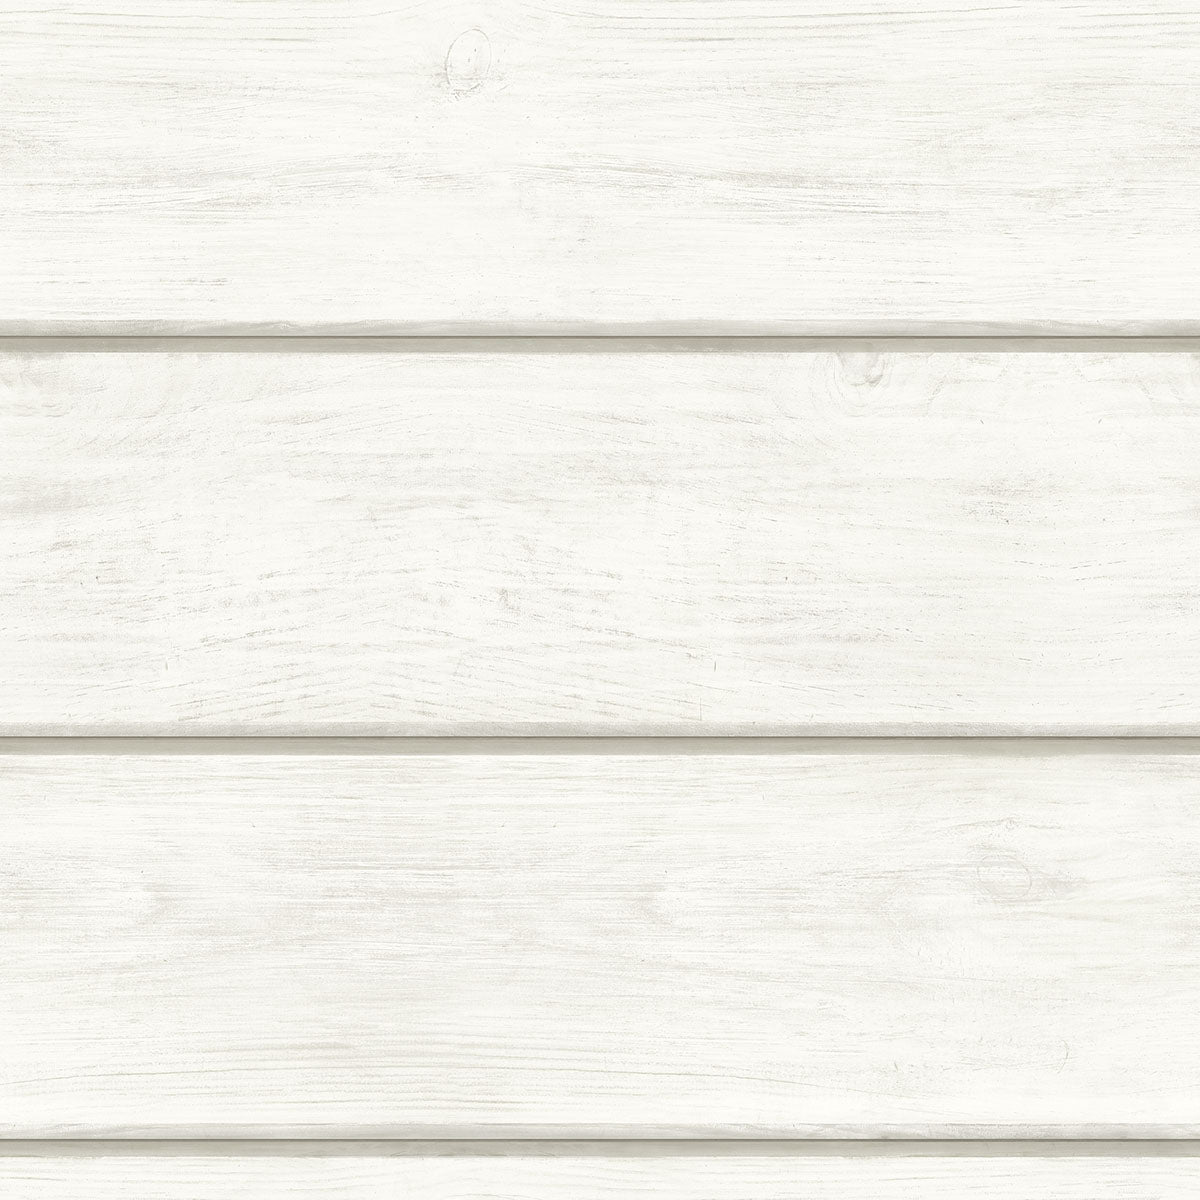 Buy 3123-12441 Homestead Cassidy White Wood Planks White by Chesapeake Wallpaper